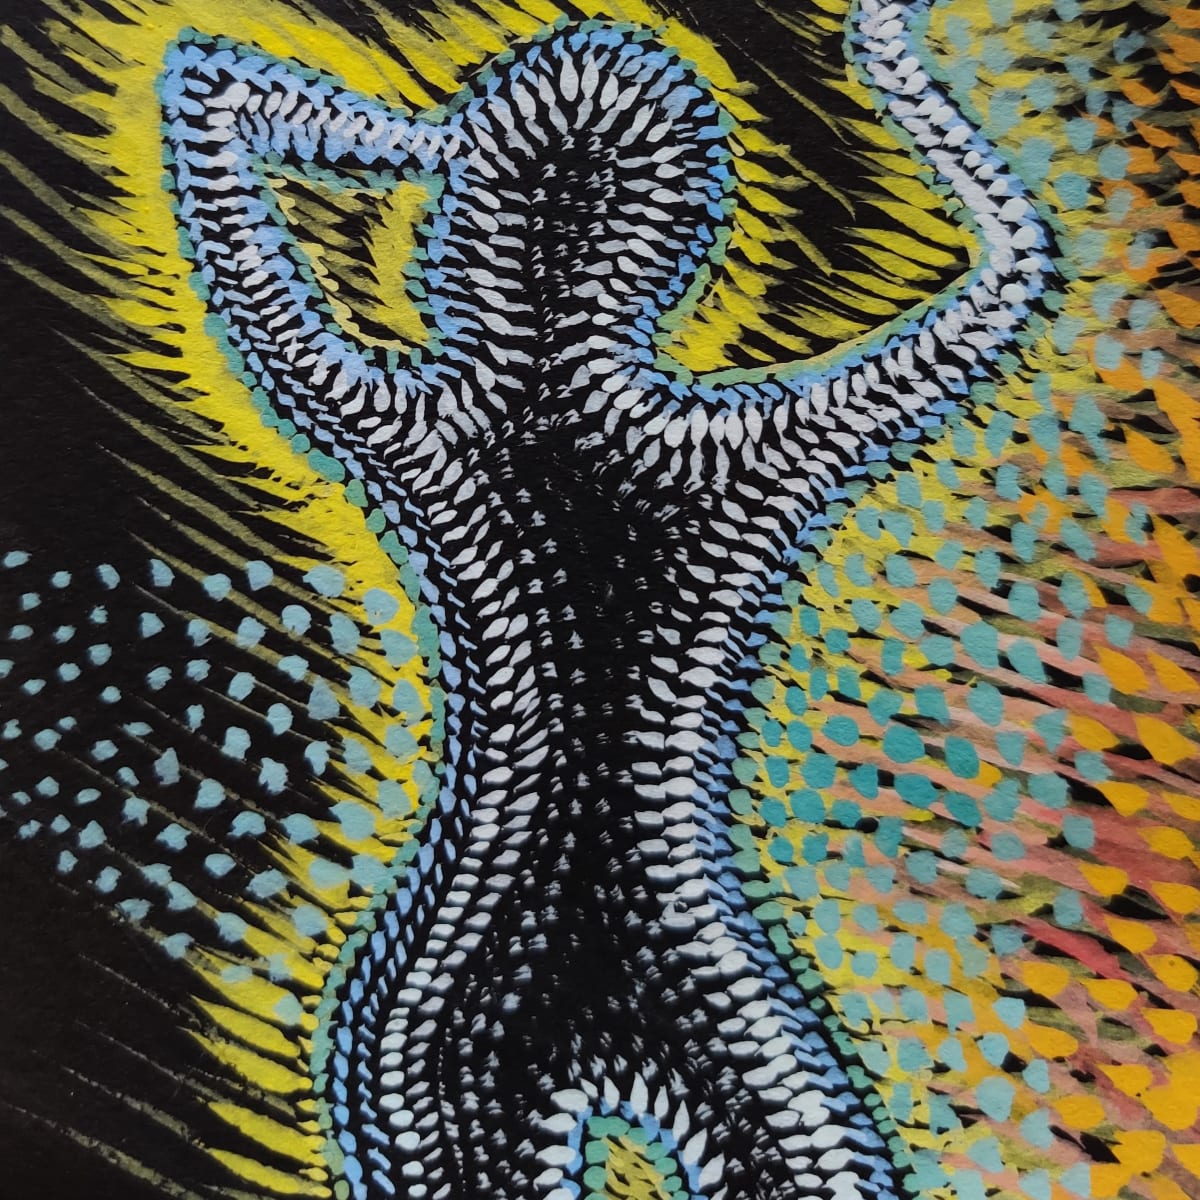 wild body by Heather Lewis  Image: A figure, surrounded by glowing energy. 